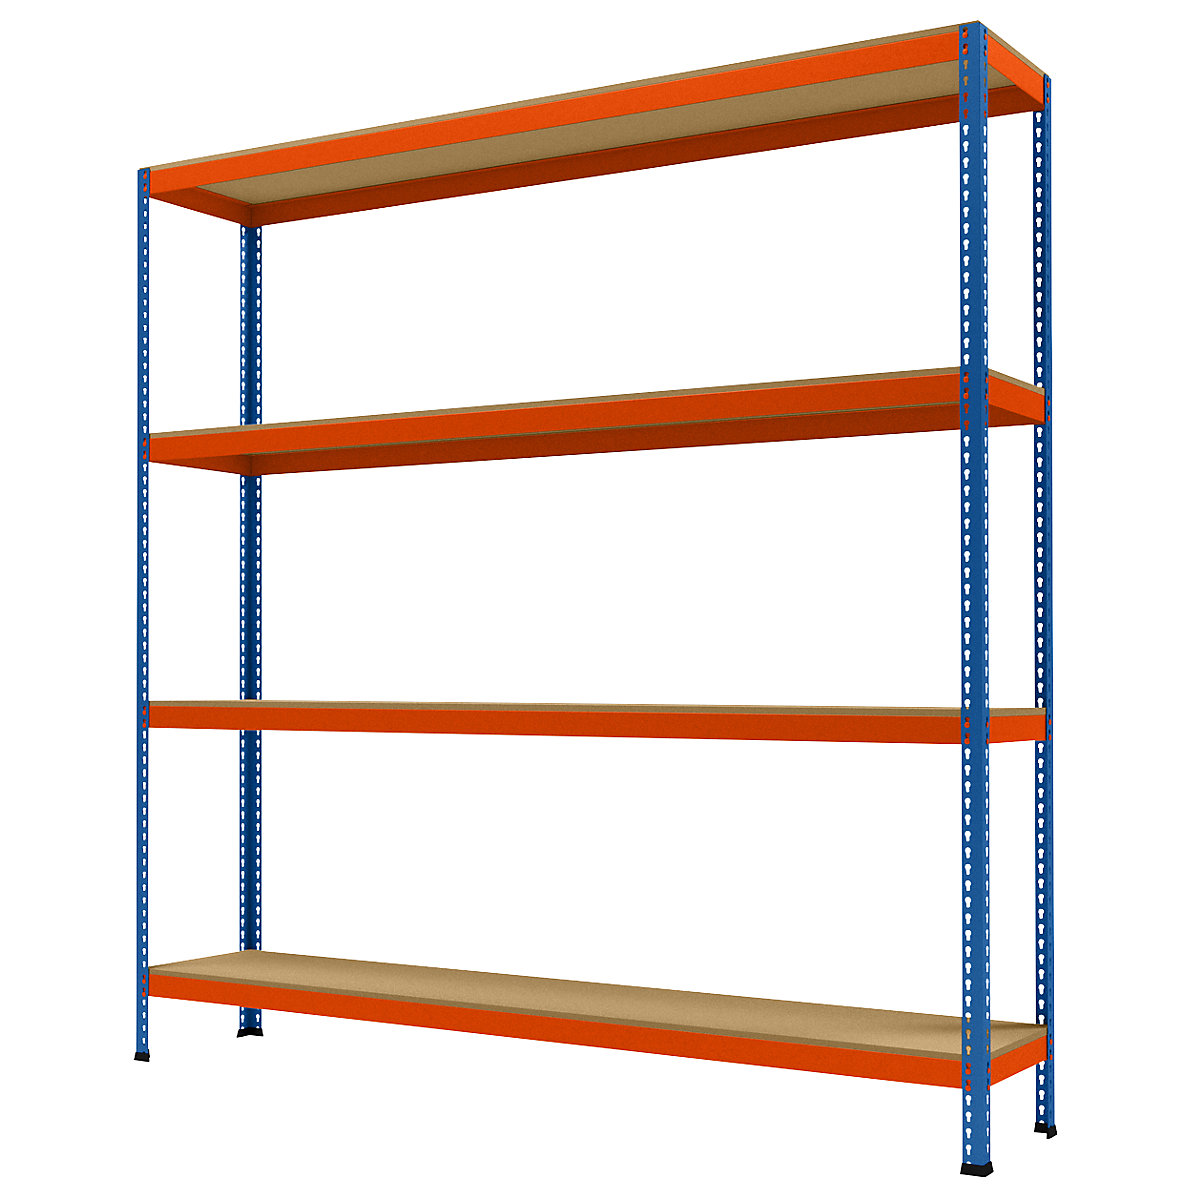 Wide span heavy duty shelving, height 2438 mm, overall depth 468 mm, width 2450 mm